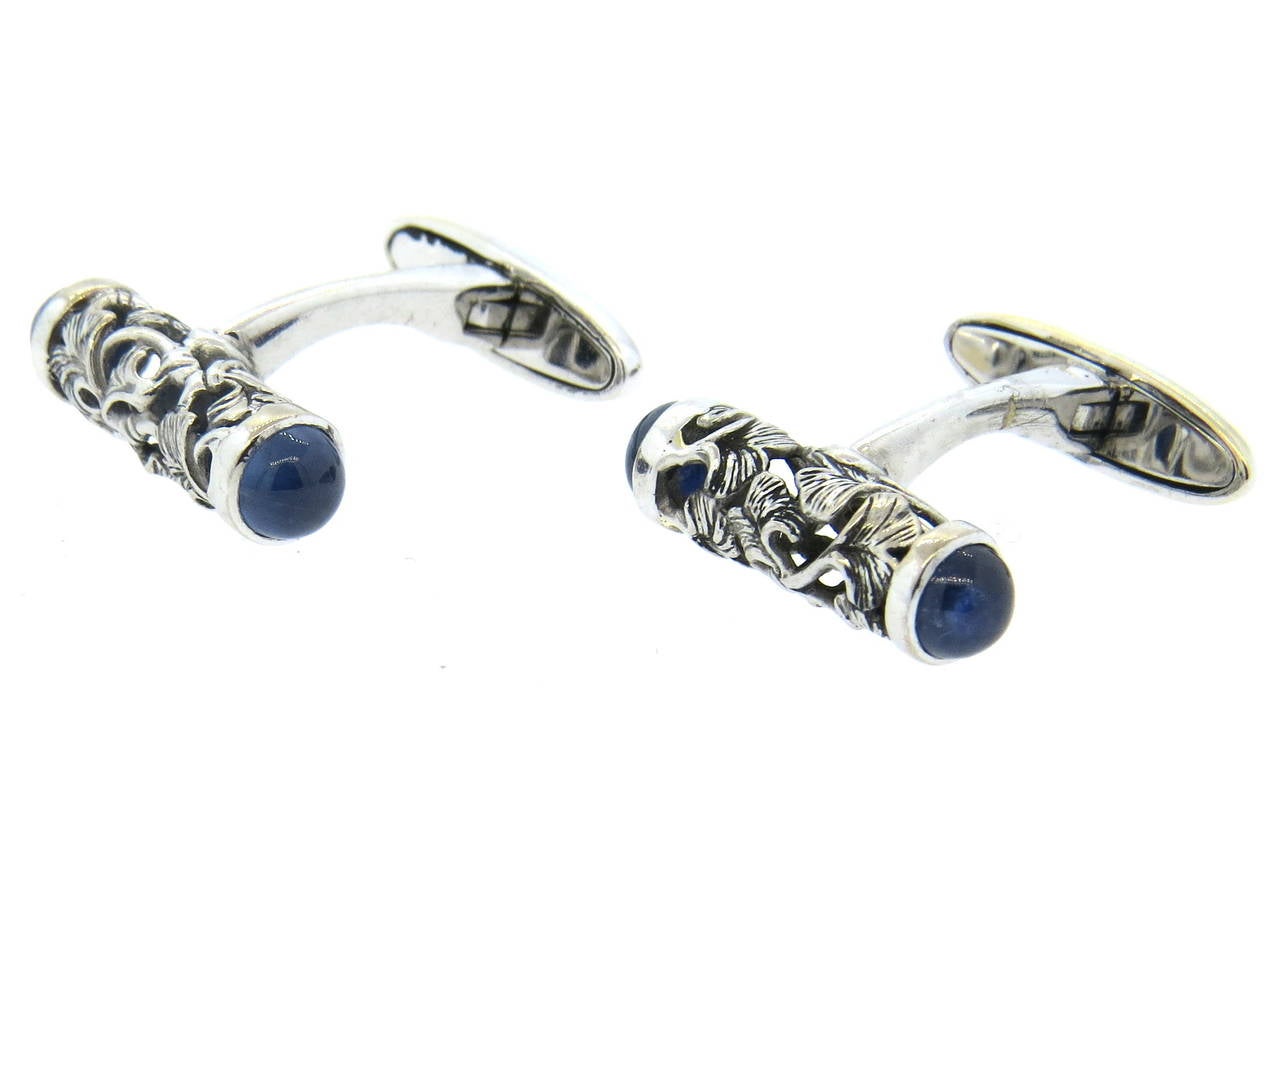 18k white gold carved cufflinks by Carrera Y Carrera with sapphire cabochons. Tops measure 20mm x 5mm. Marked with makers hallmark, serial number 423828 and 750. weight - 9.6gr